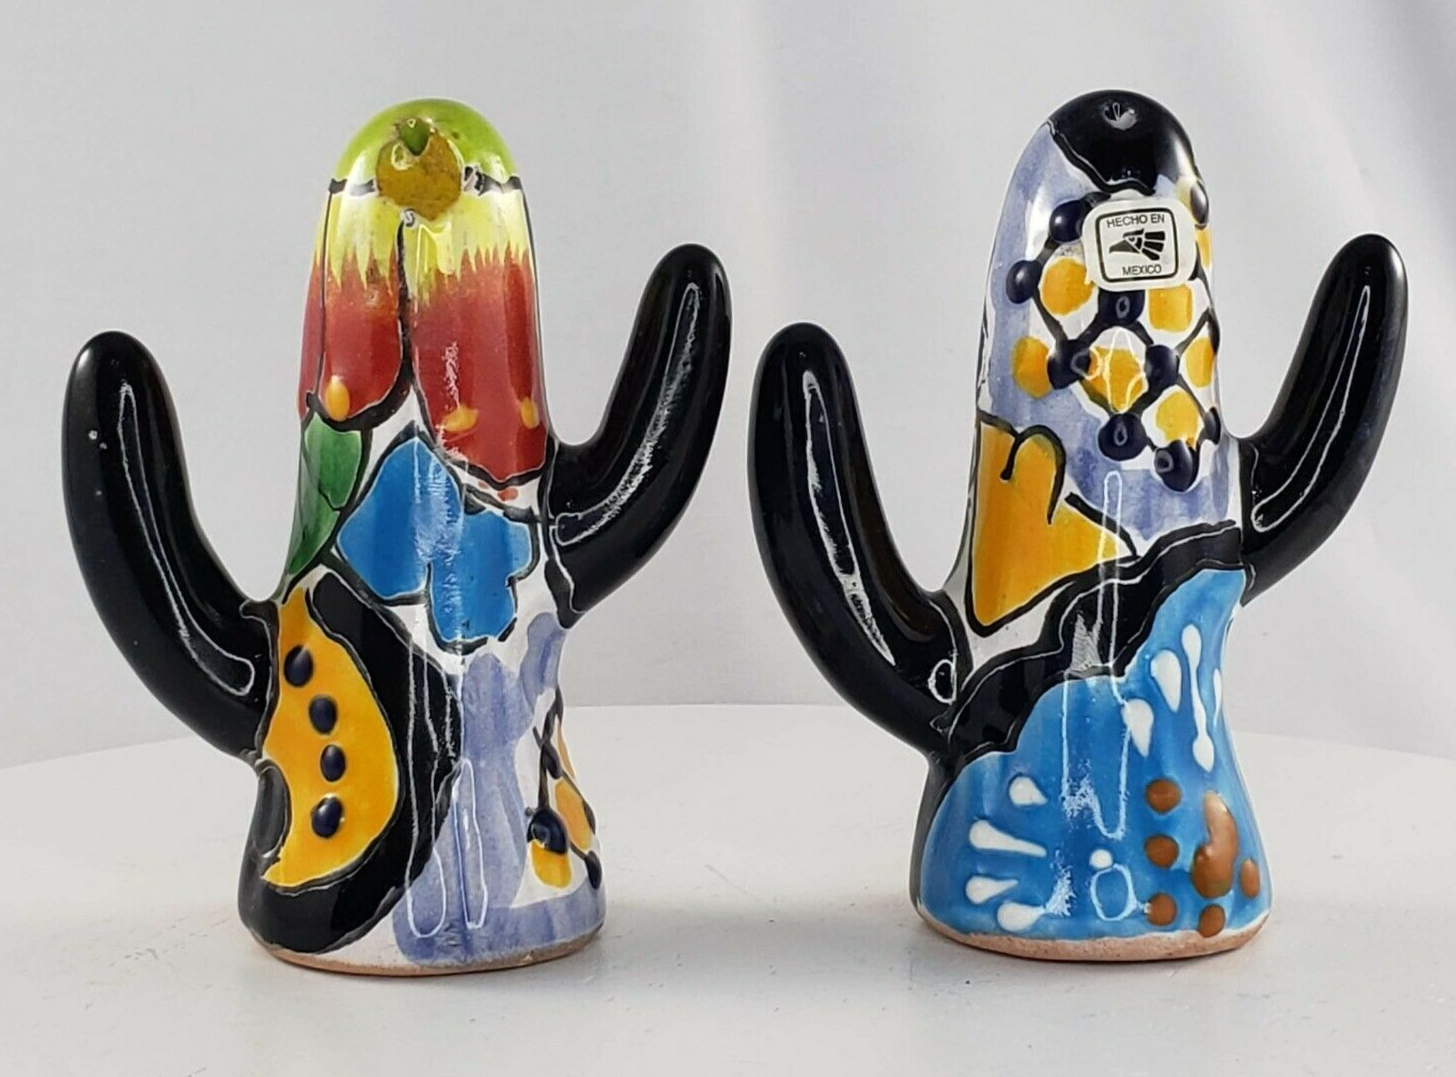 Primary image for Talavera Mexican Pottery Saguaro Cactus Salt And Pepper Shaker Set